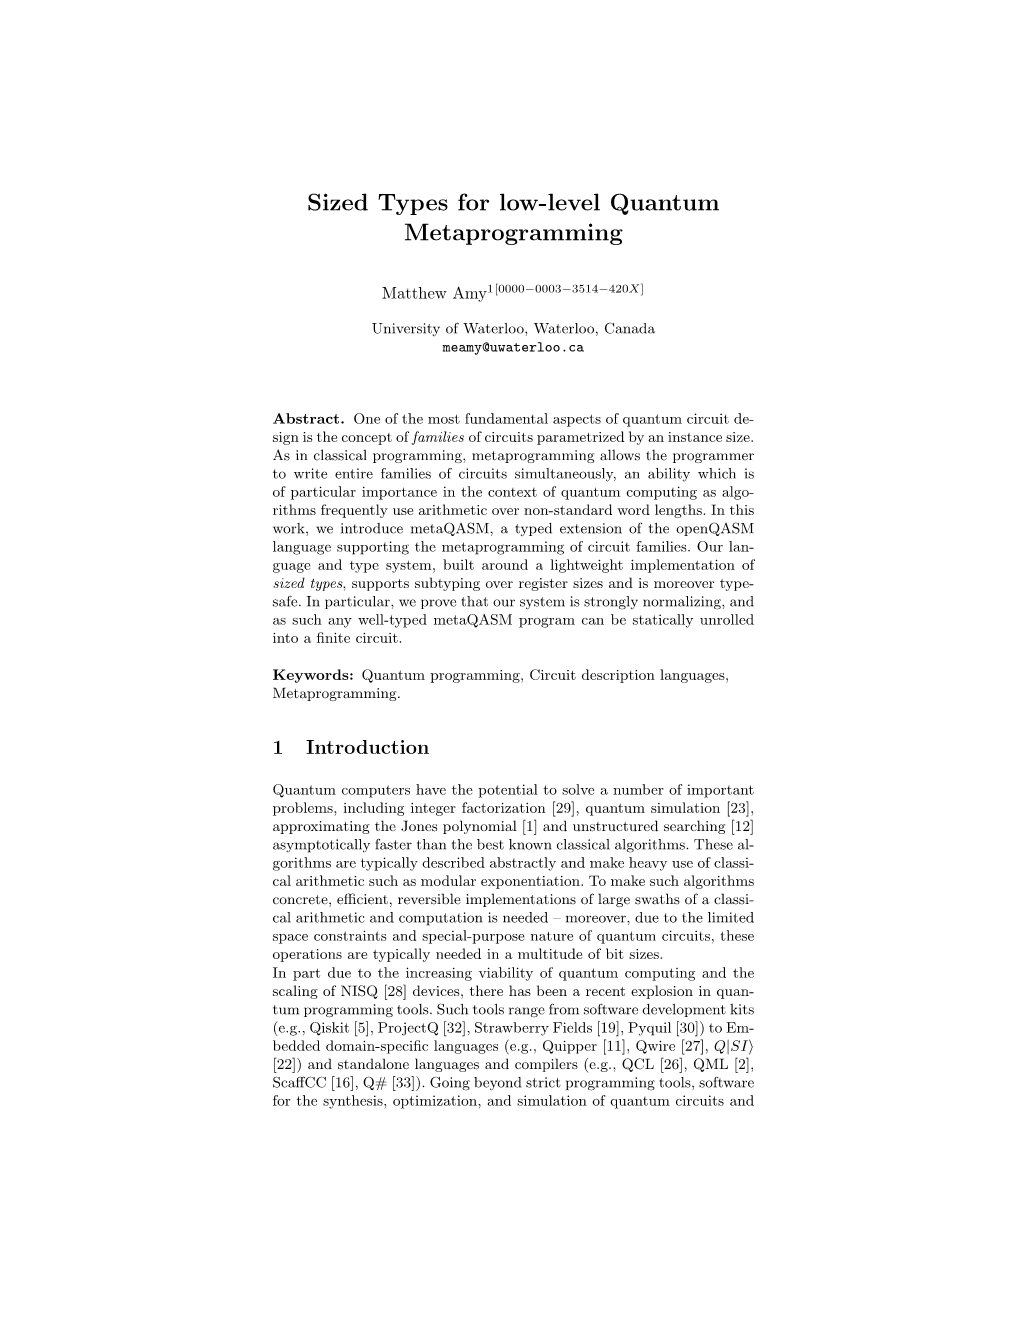 Sized Types for Low-Level Quantum Metaprogramming